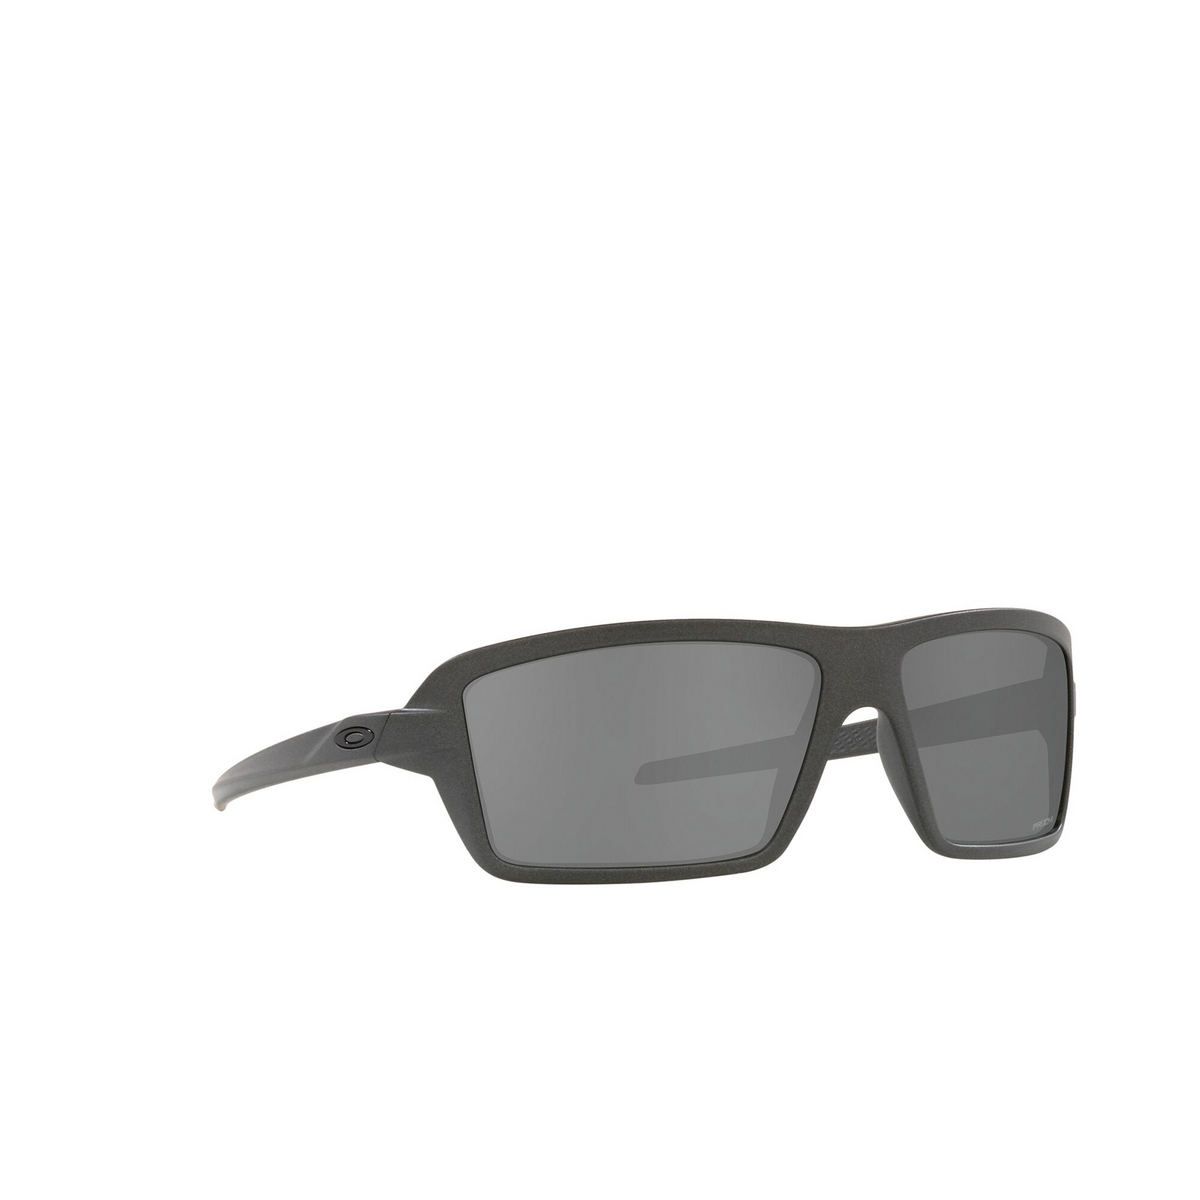 Oakley CABLES Sunglasses 912903 Steel - three-quarters view